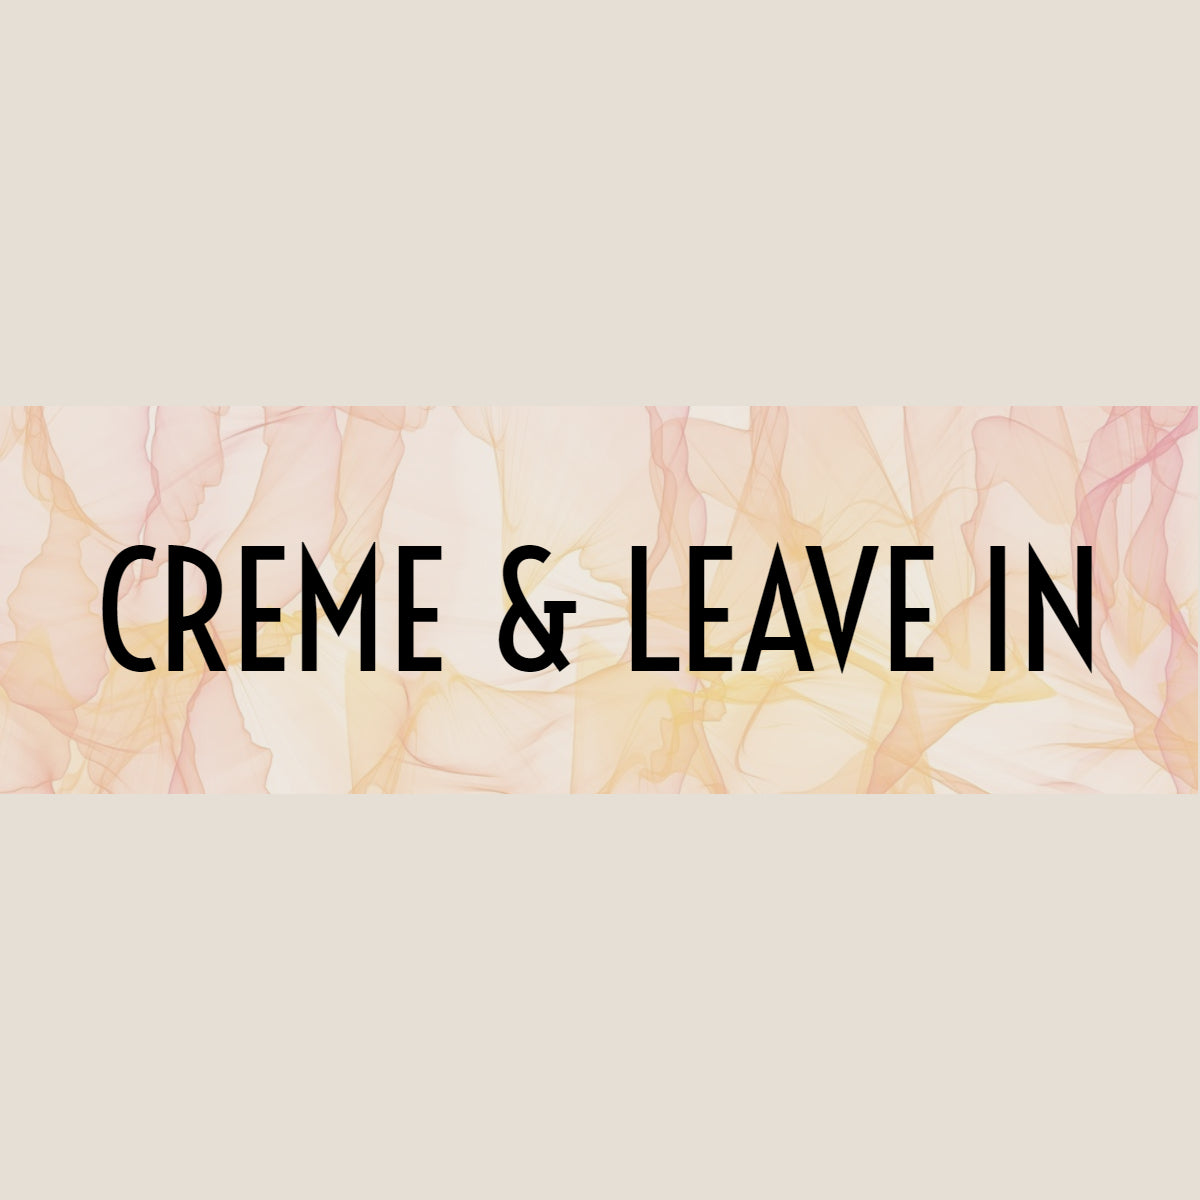 Creme & Leave in